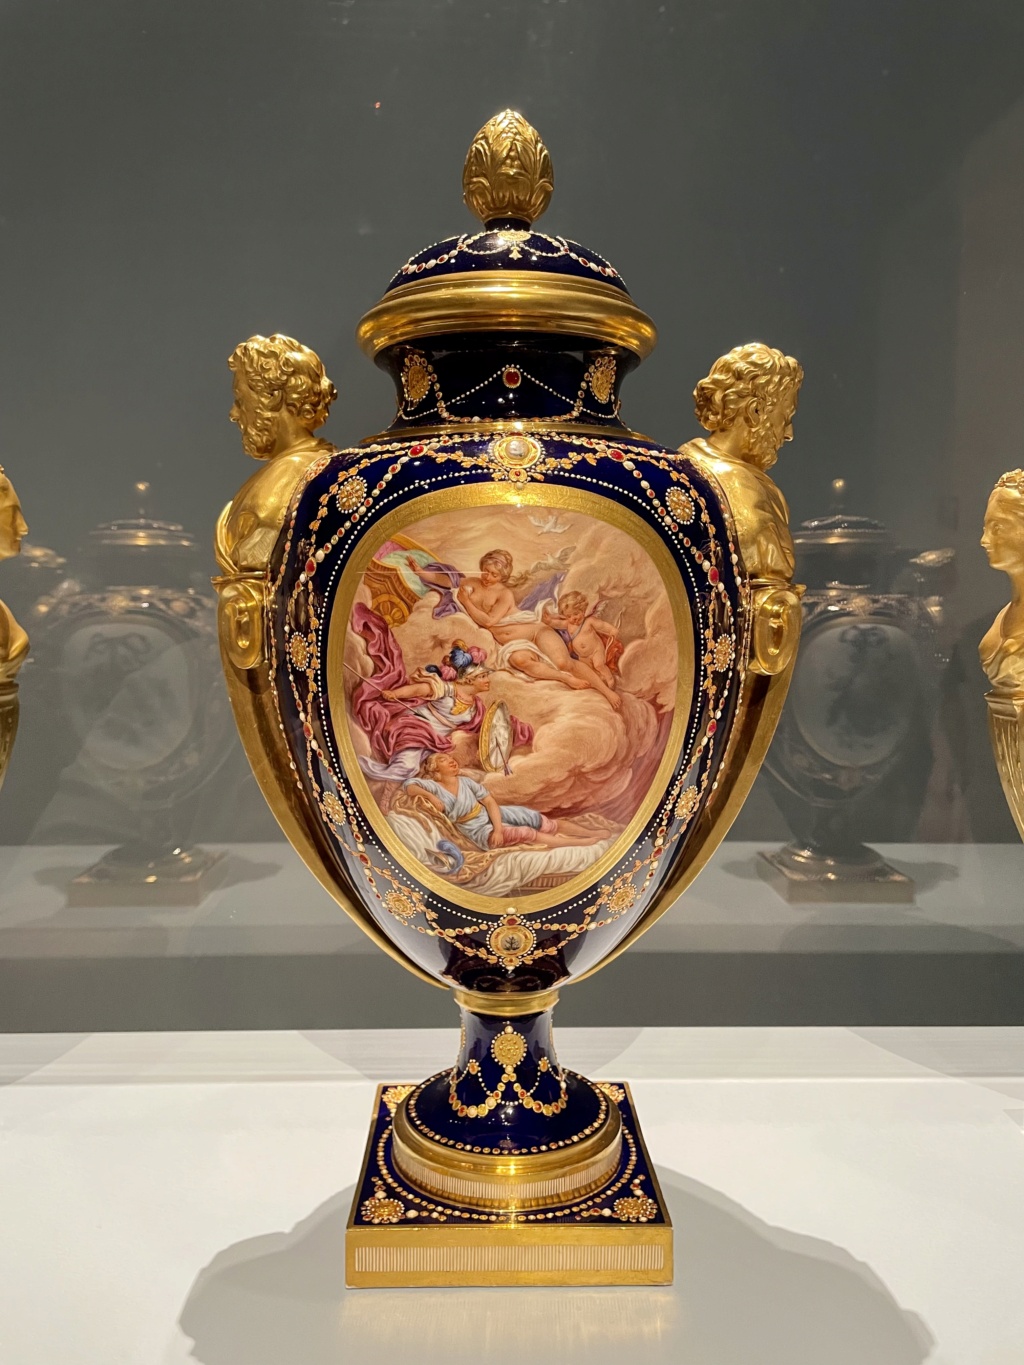 Exposition : Porcelain from Versailles Vases for a King & Queen. Getty Center, Los Angeles Ca46f010